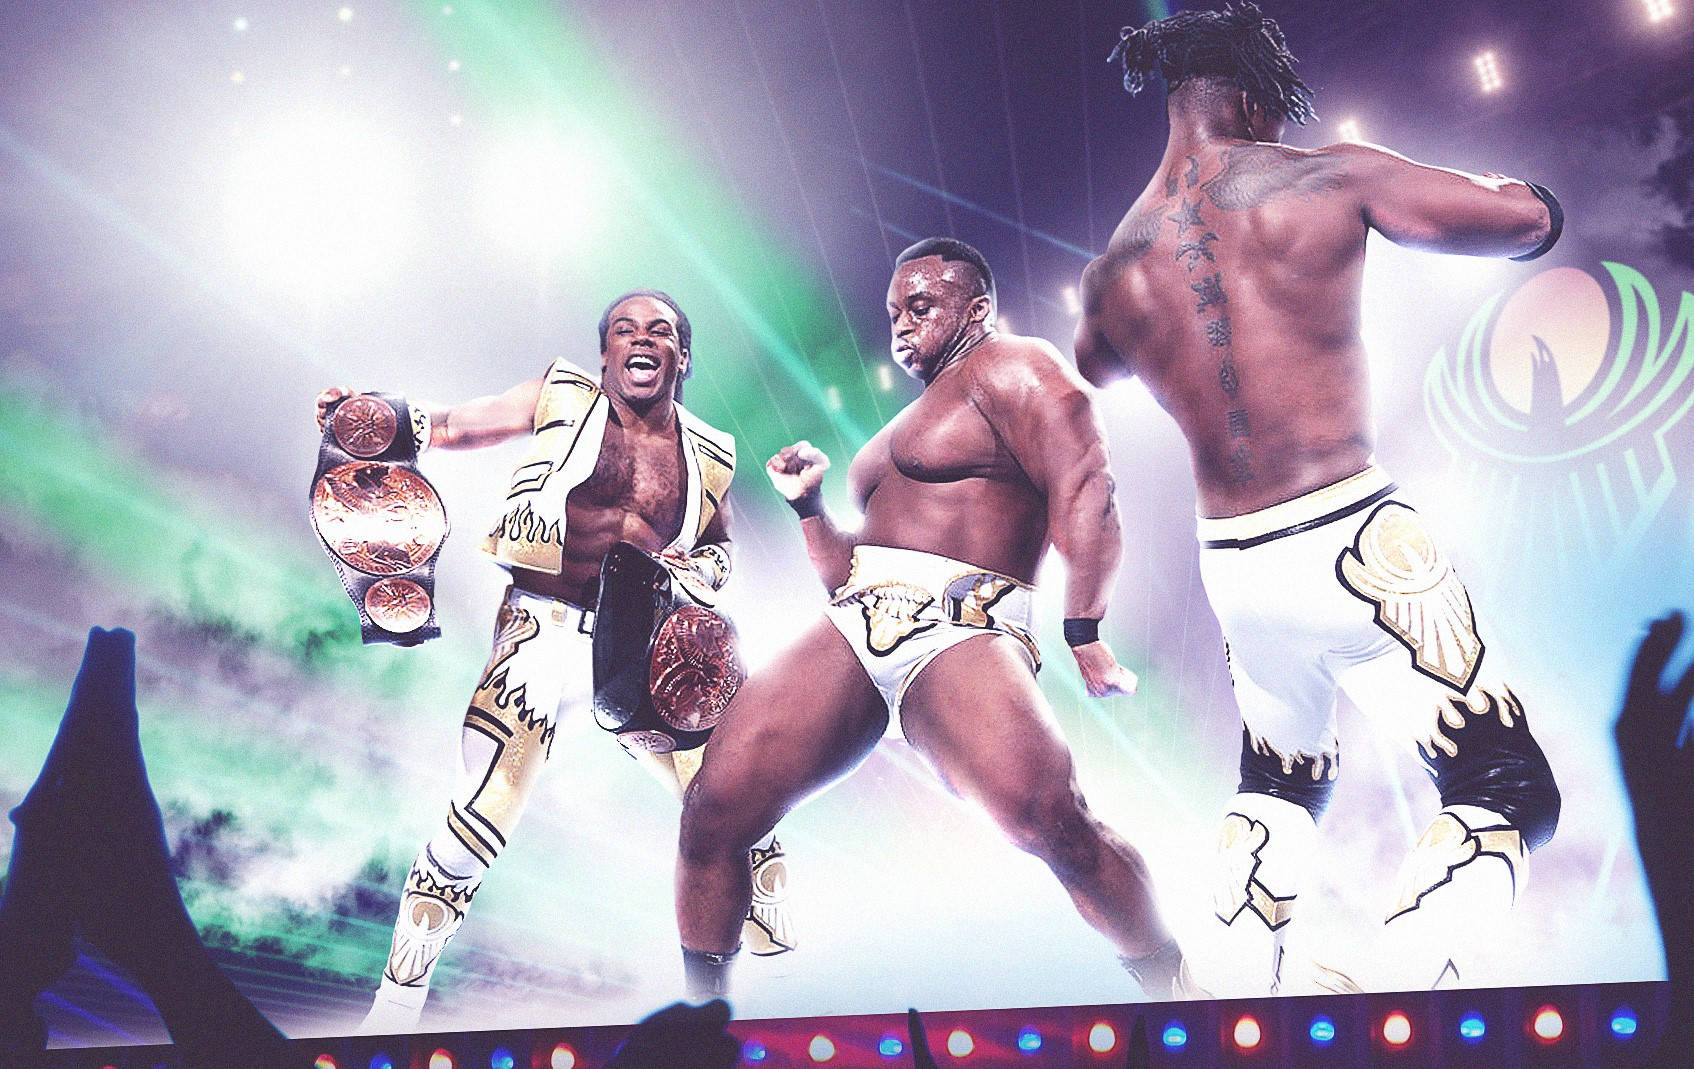 Wrestler Breaking Out The Dance Moves At The Arena Wallpaper